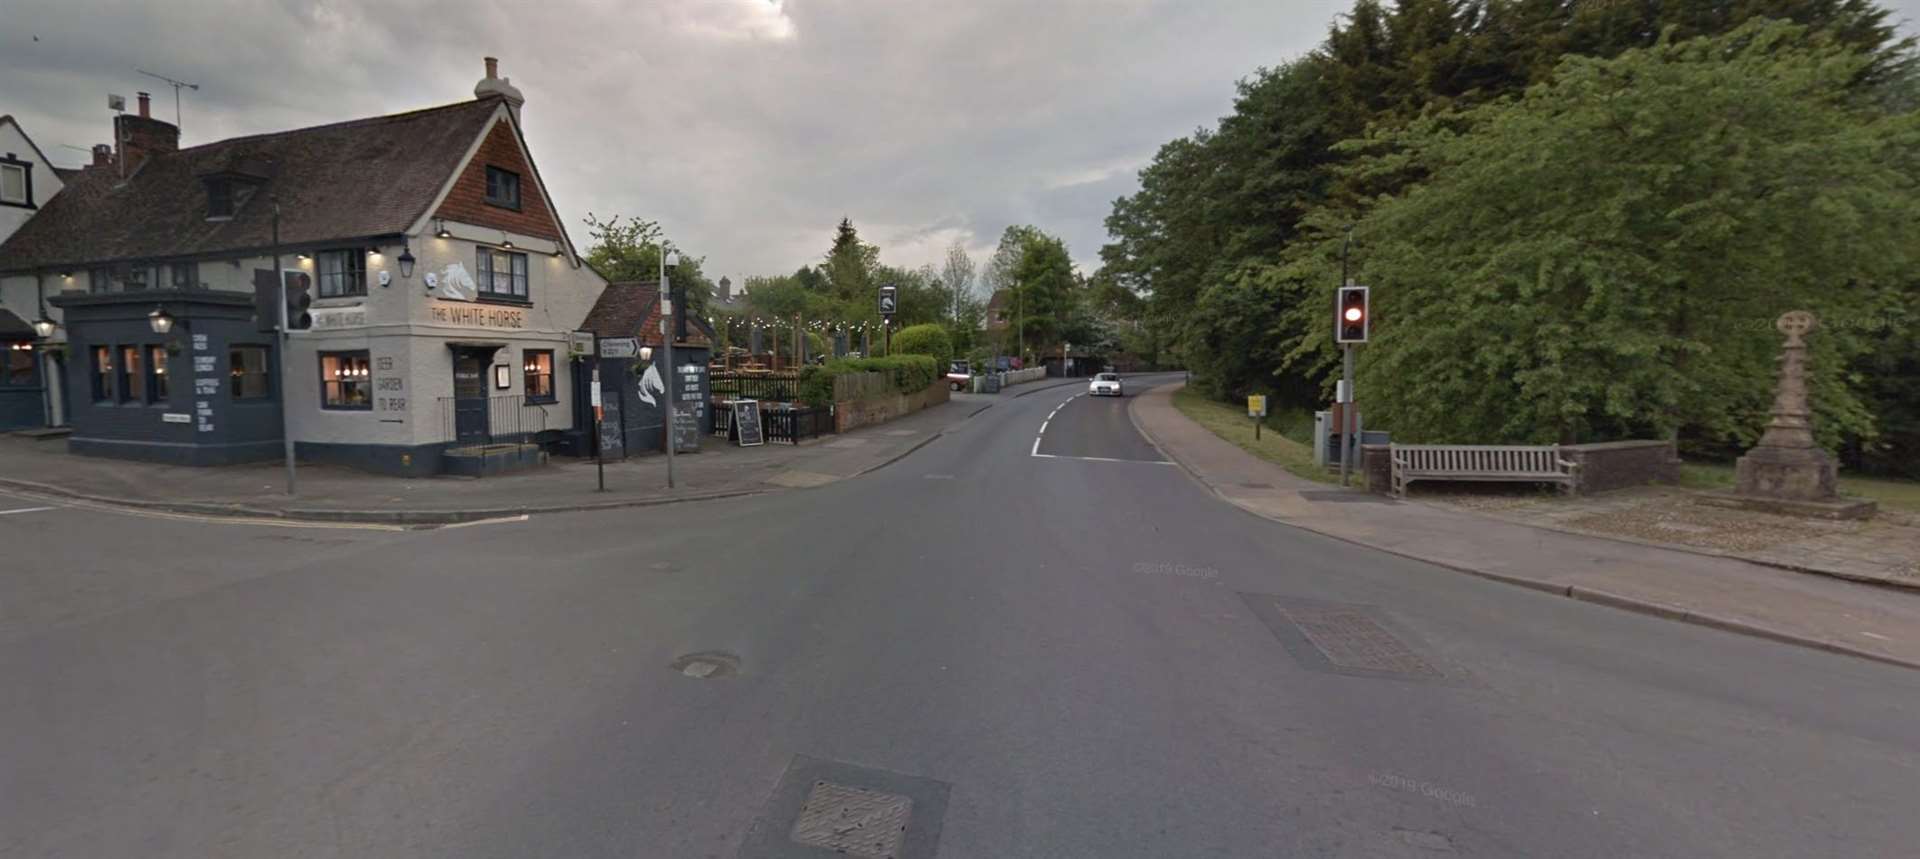 There are road works on the A25 Main Road in Sundridge. Picture: Google Street View